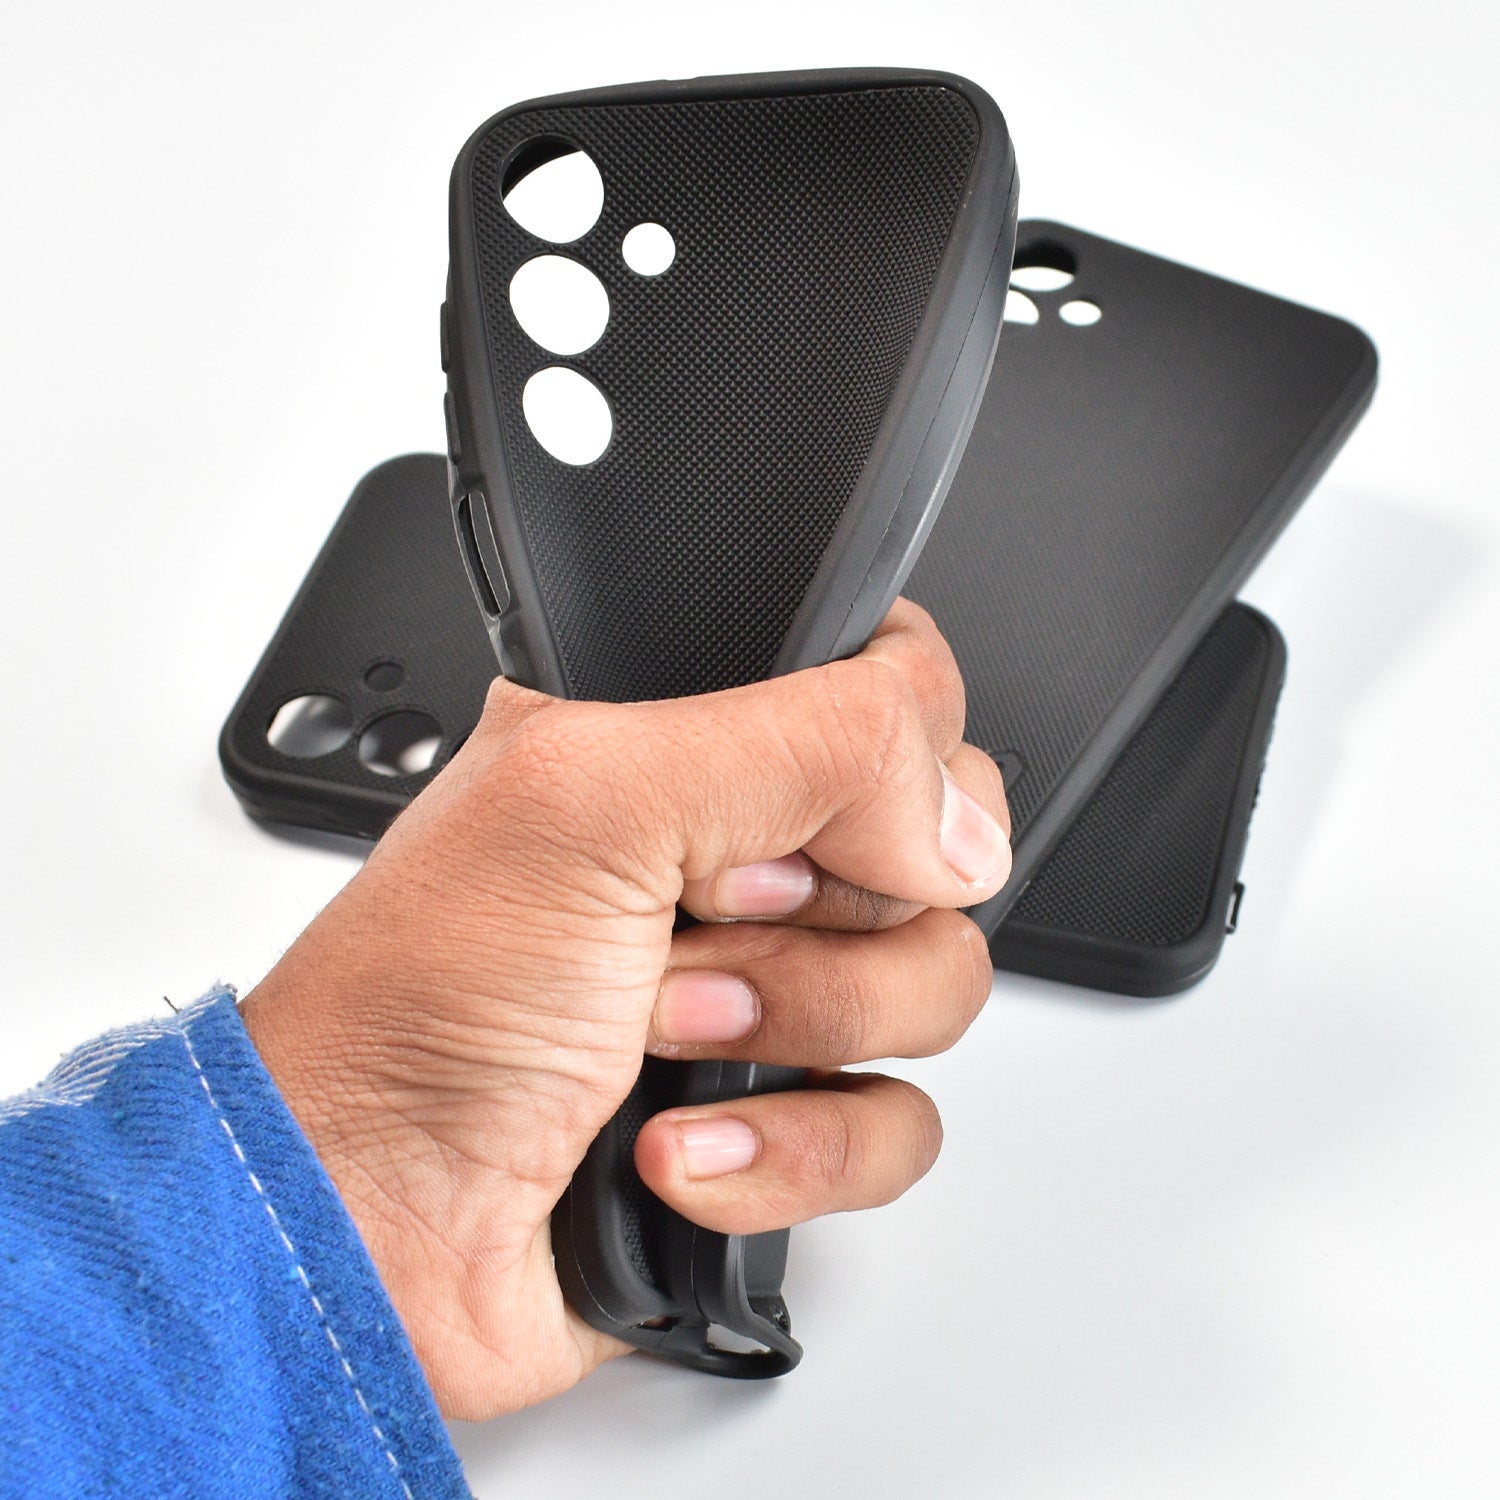 Black Frosted Soft Case For Iphone